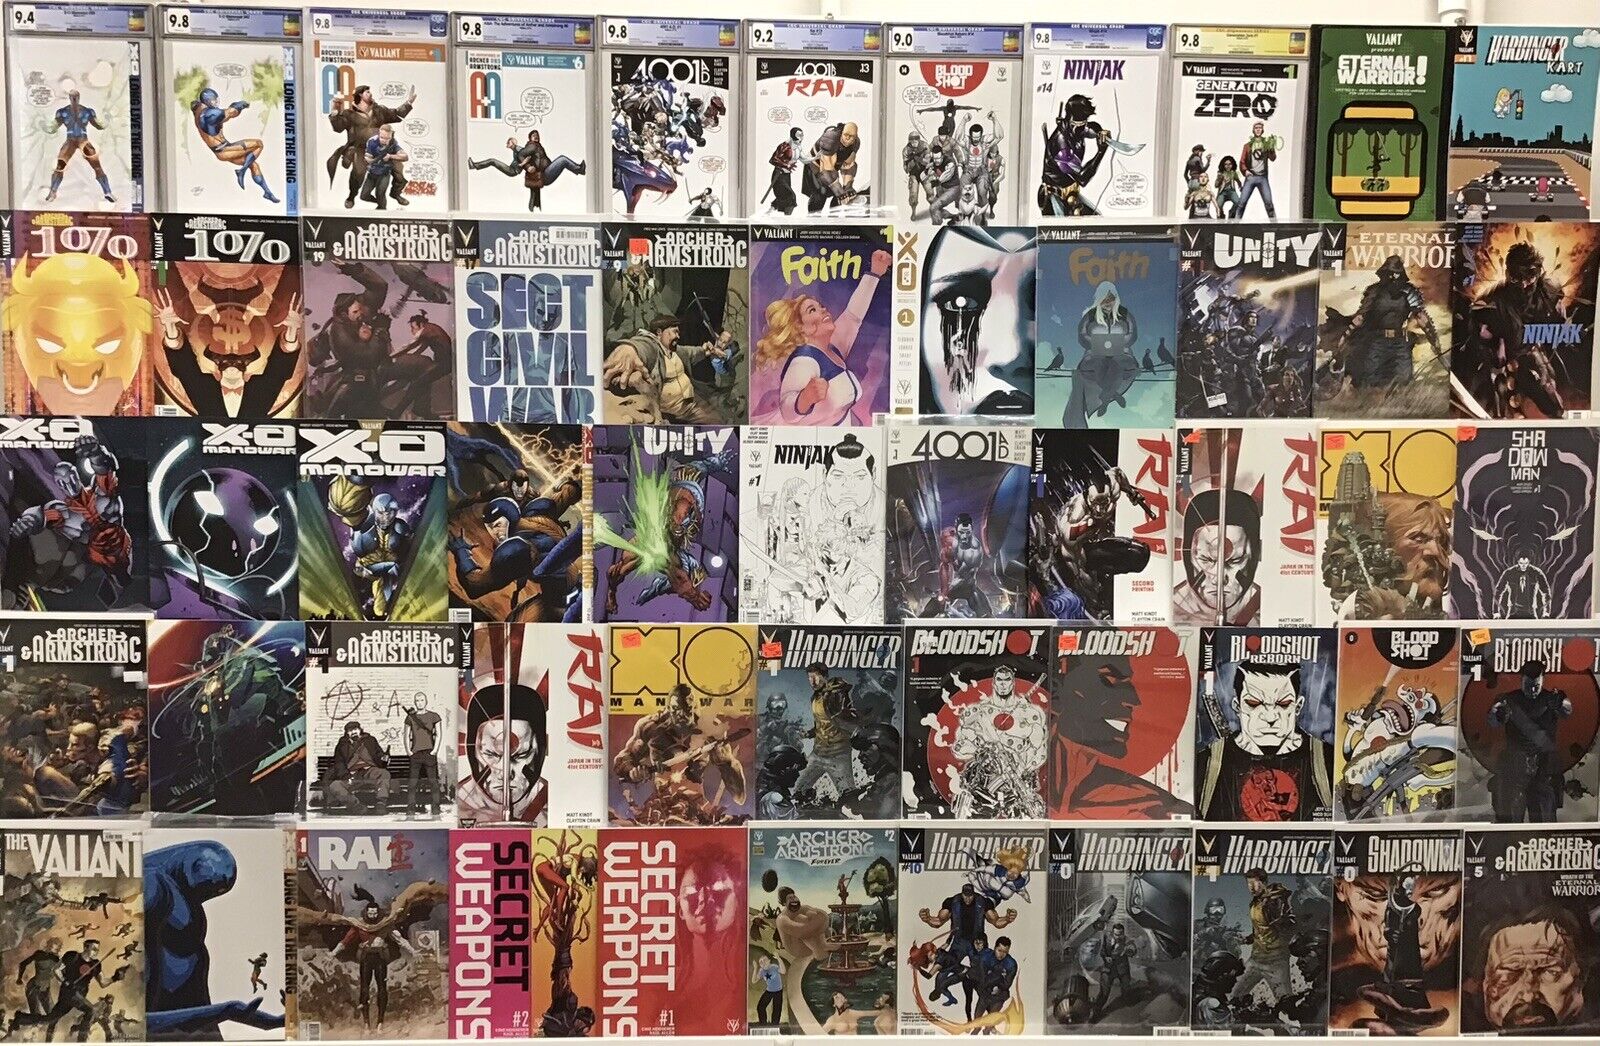 Valiant Variants - Faith, Archer Armstrong, 1070, X-O, Bloodshot - More In Bio